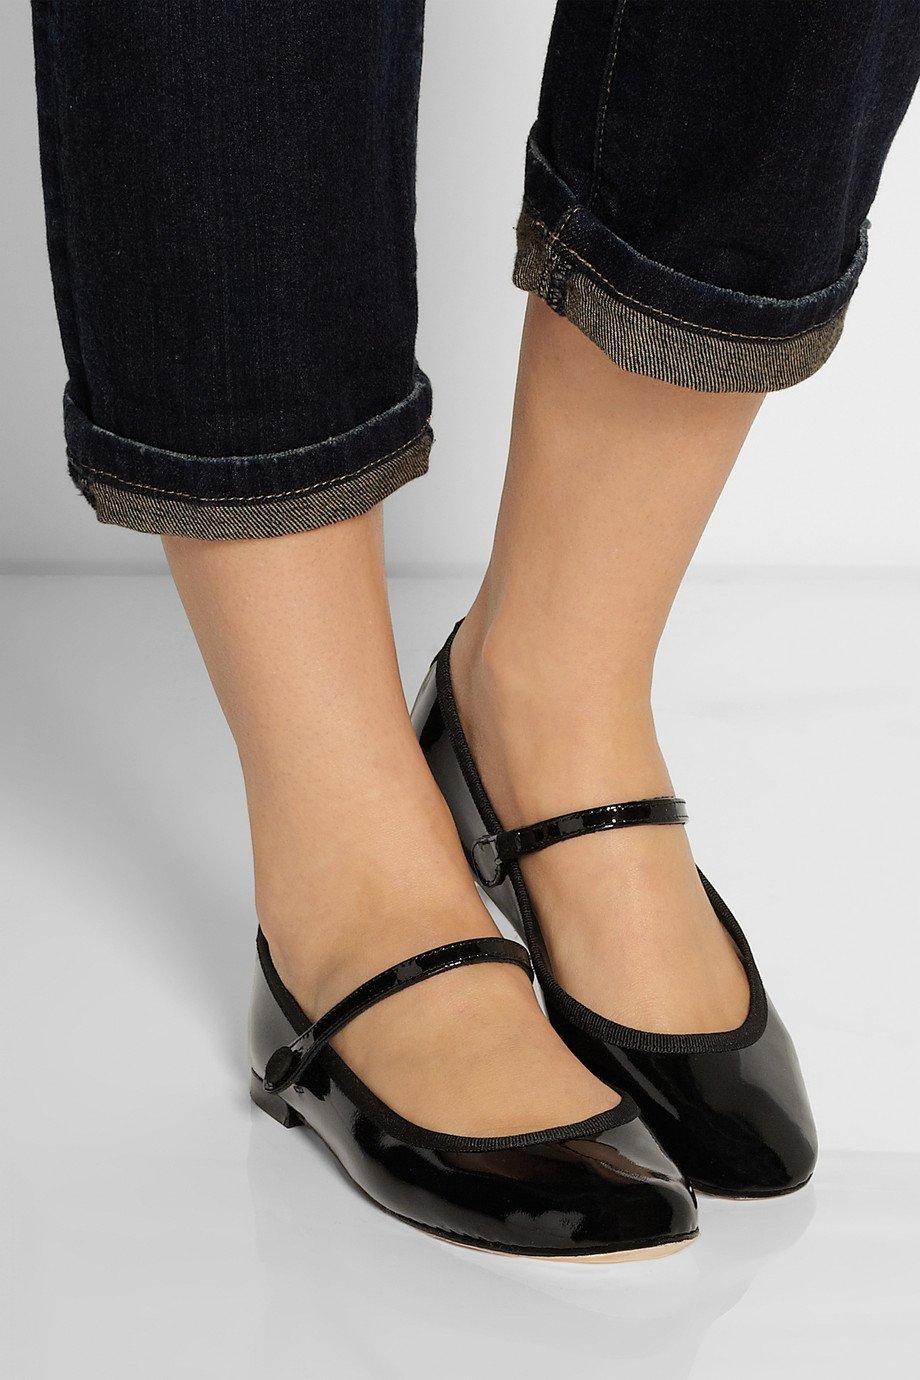 Repetto Lio Patent Leather Mary  Jane  Ballet Flats  in Black 